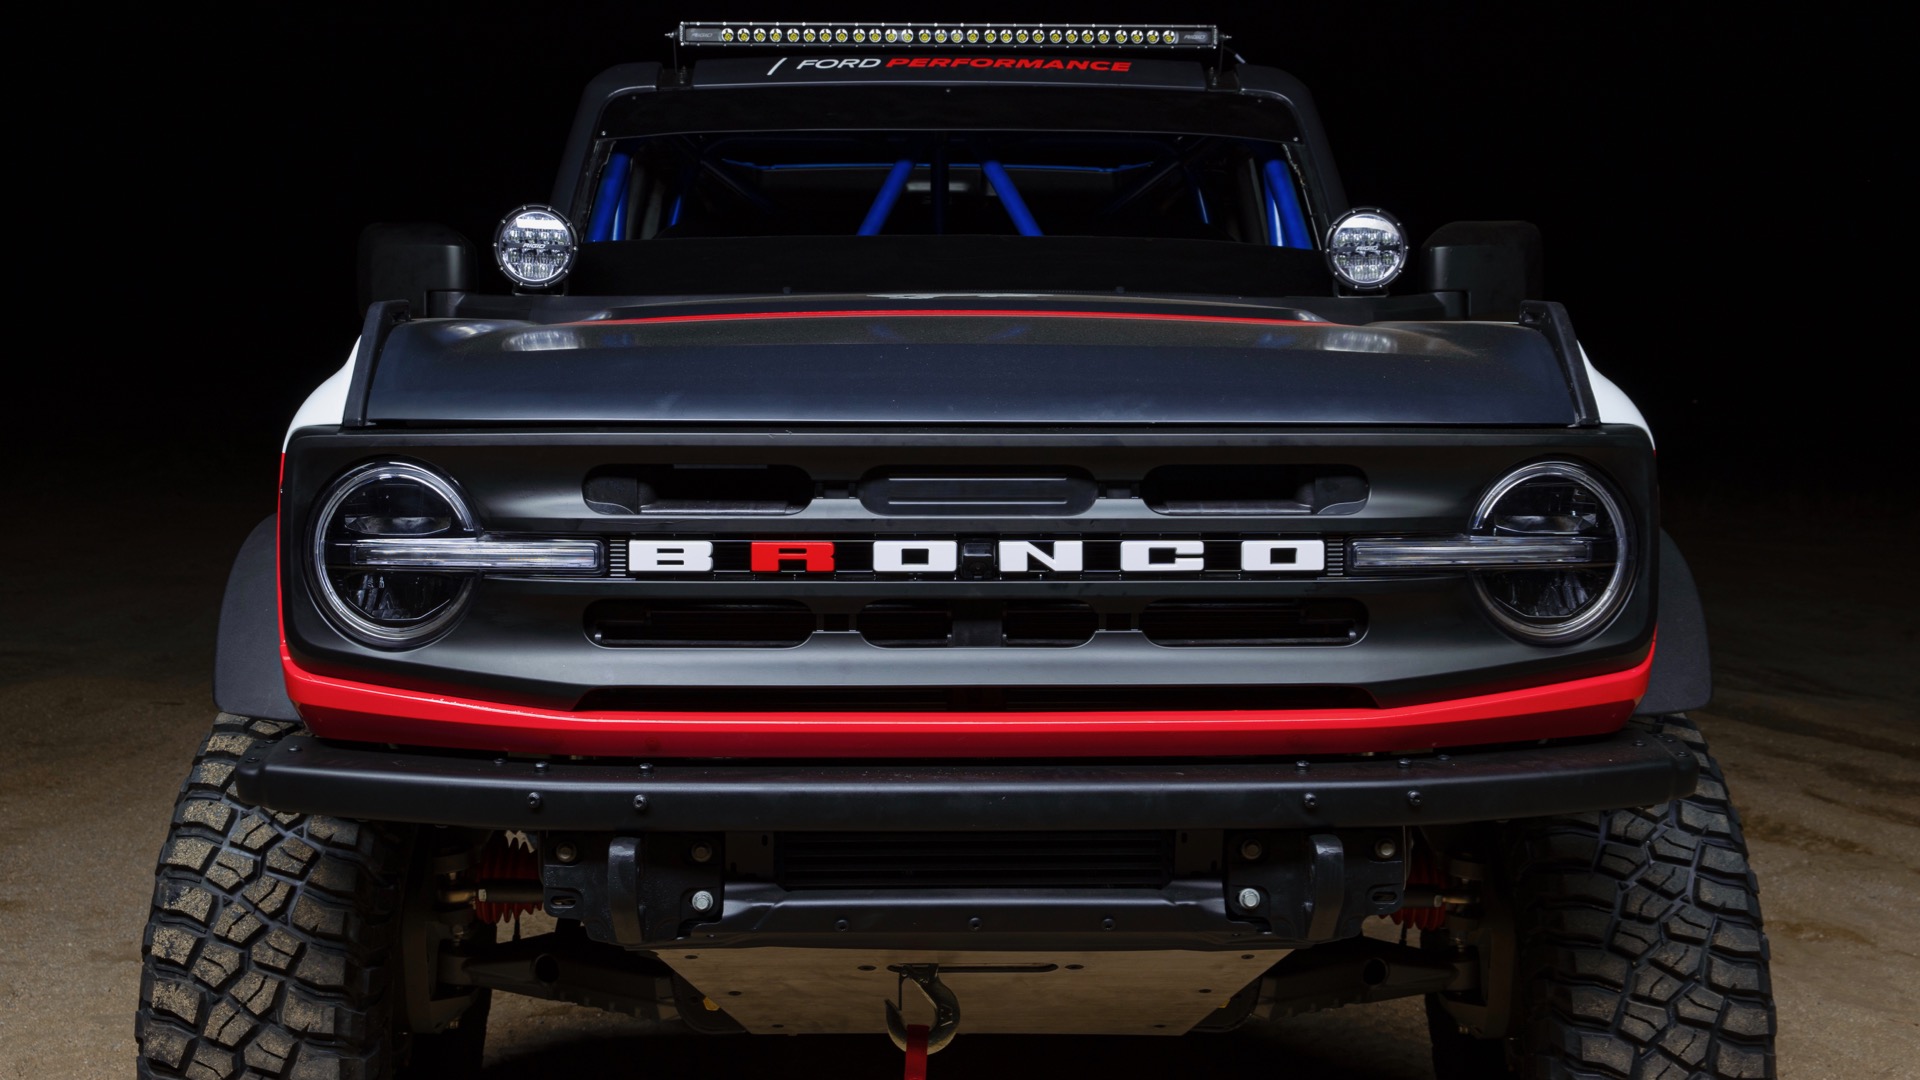 2021 Ford Bronco will go offroad racing in Ultra4 series